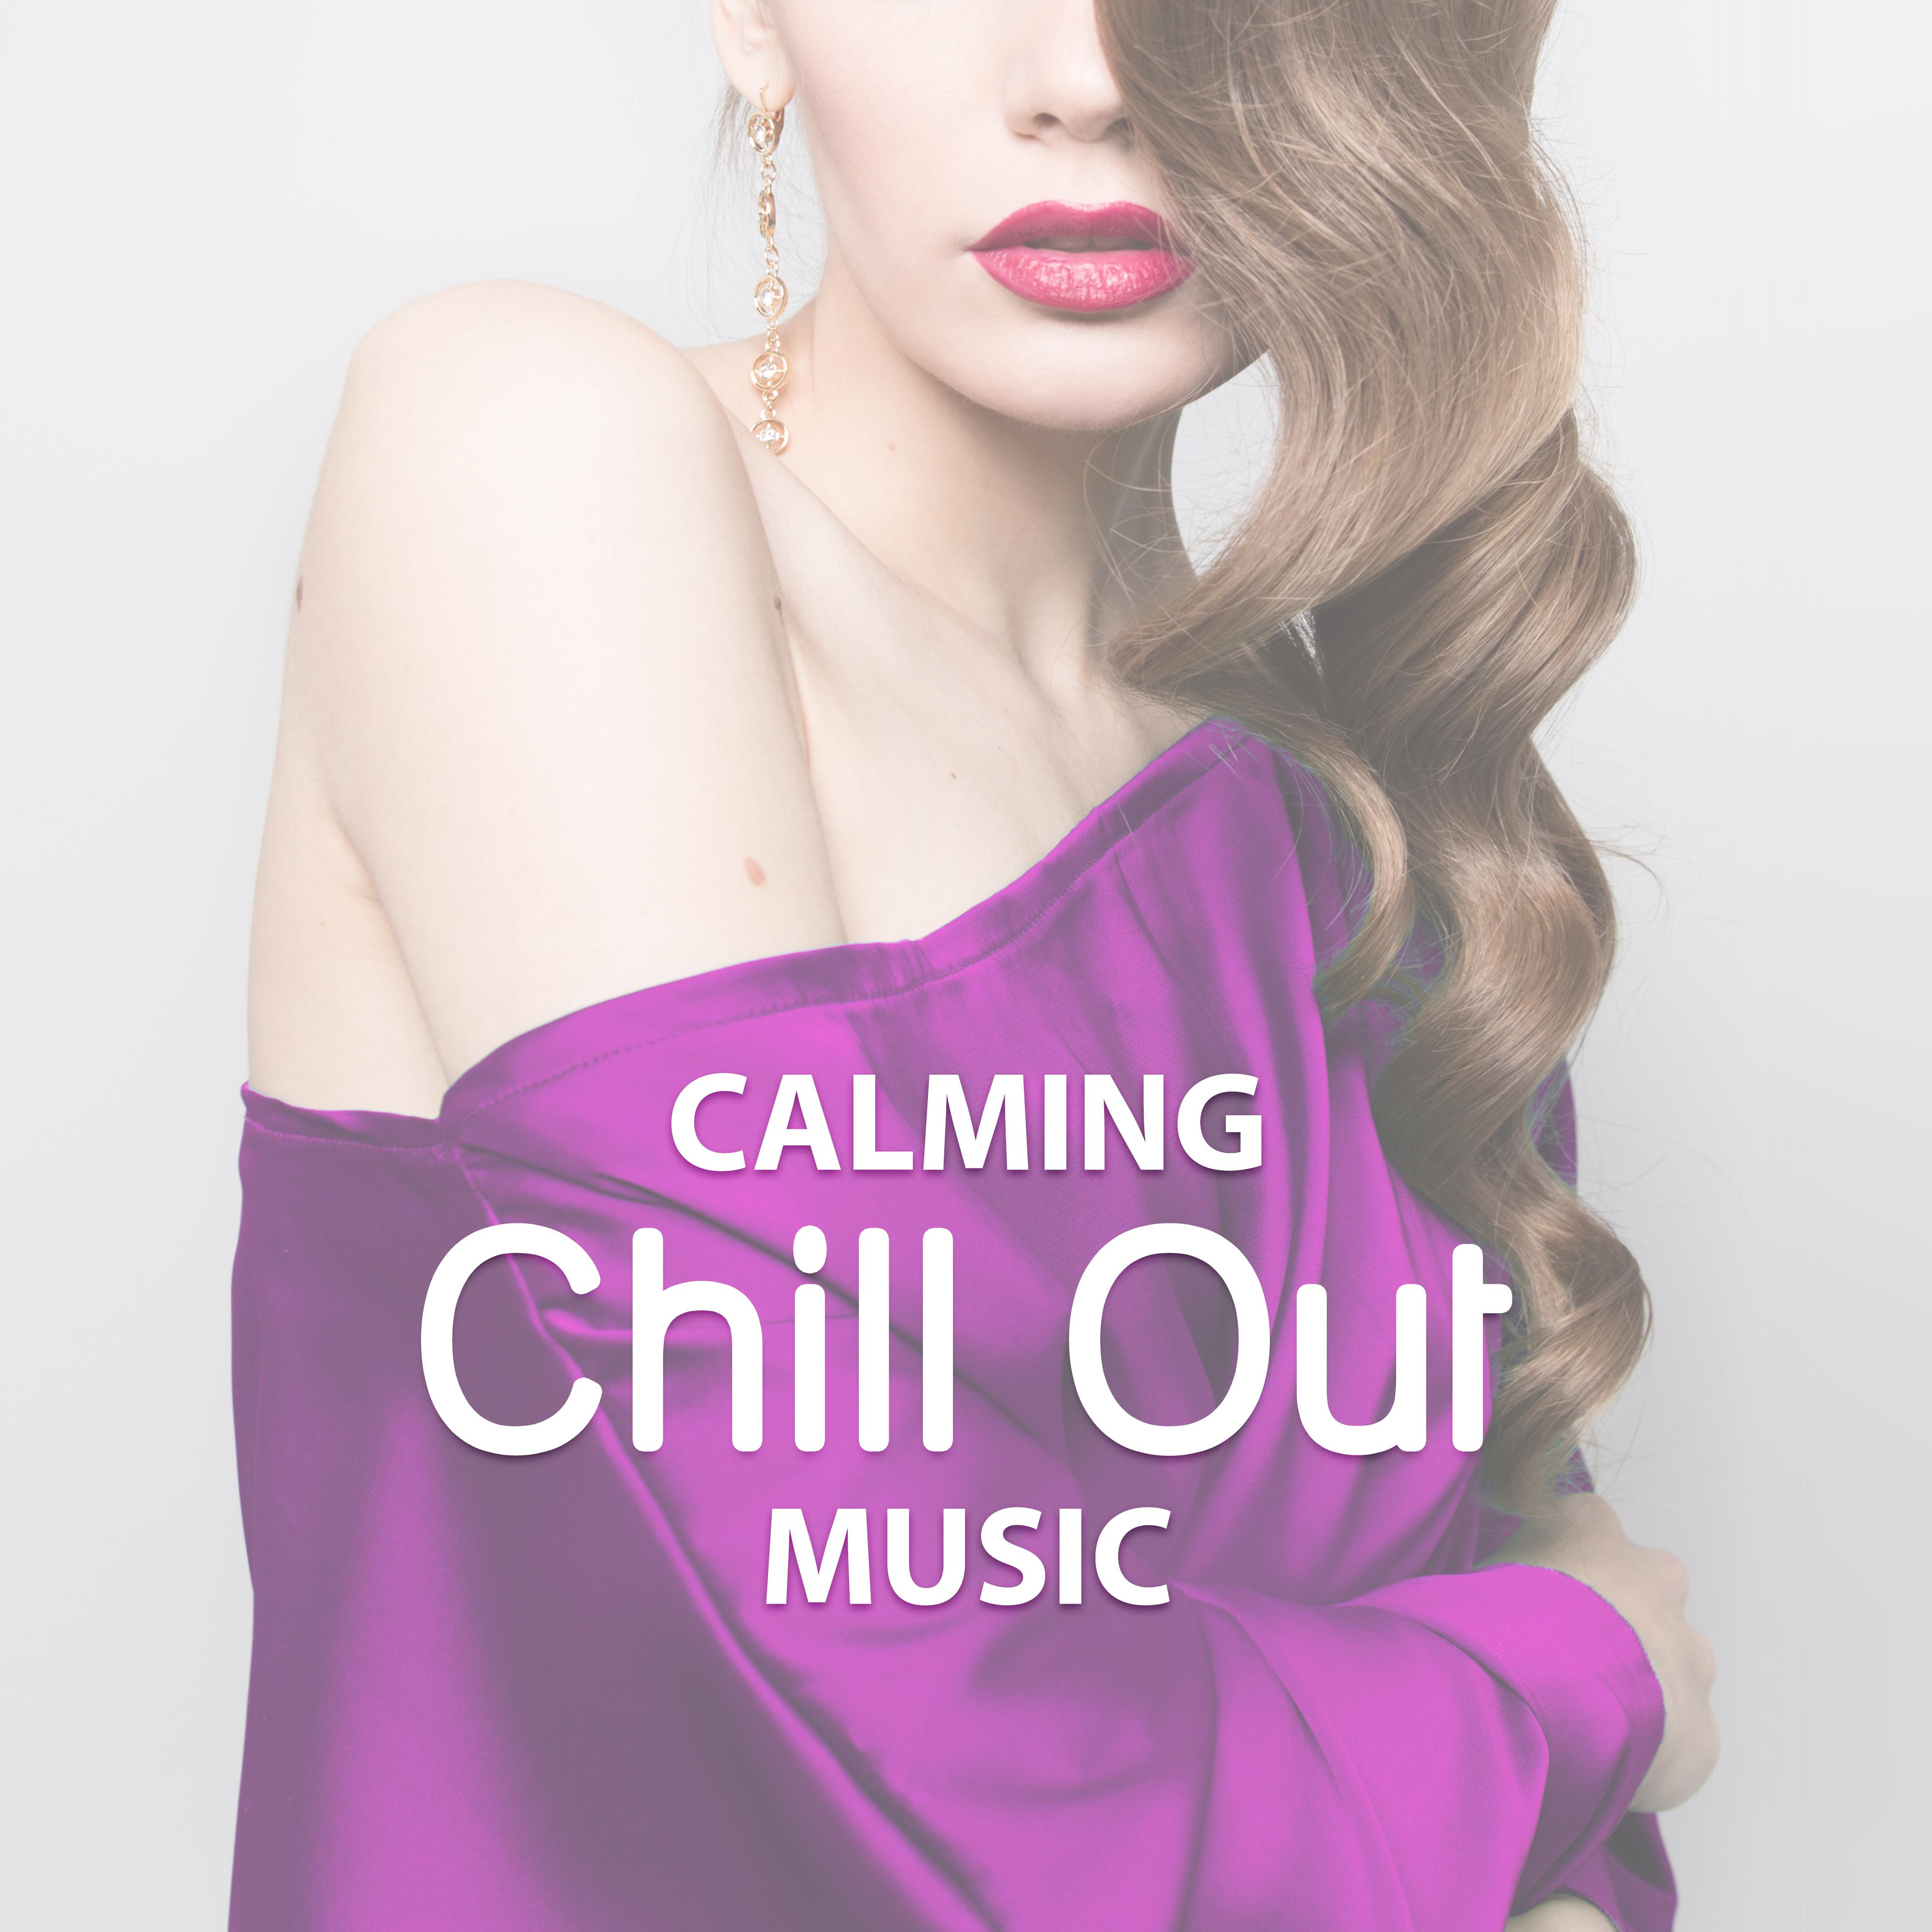 Calming Chill Out Music – Sensual Chill Music, Soft Music, Beach Lounge, Relaxing Summer